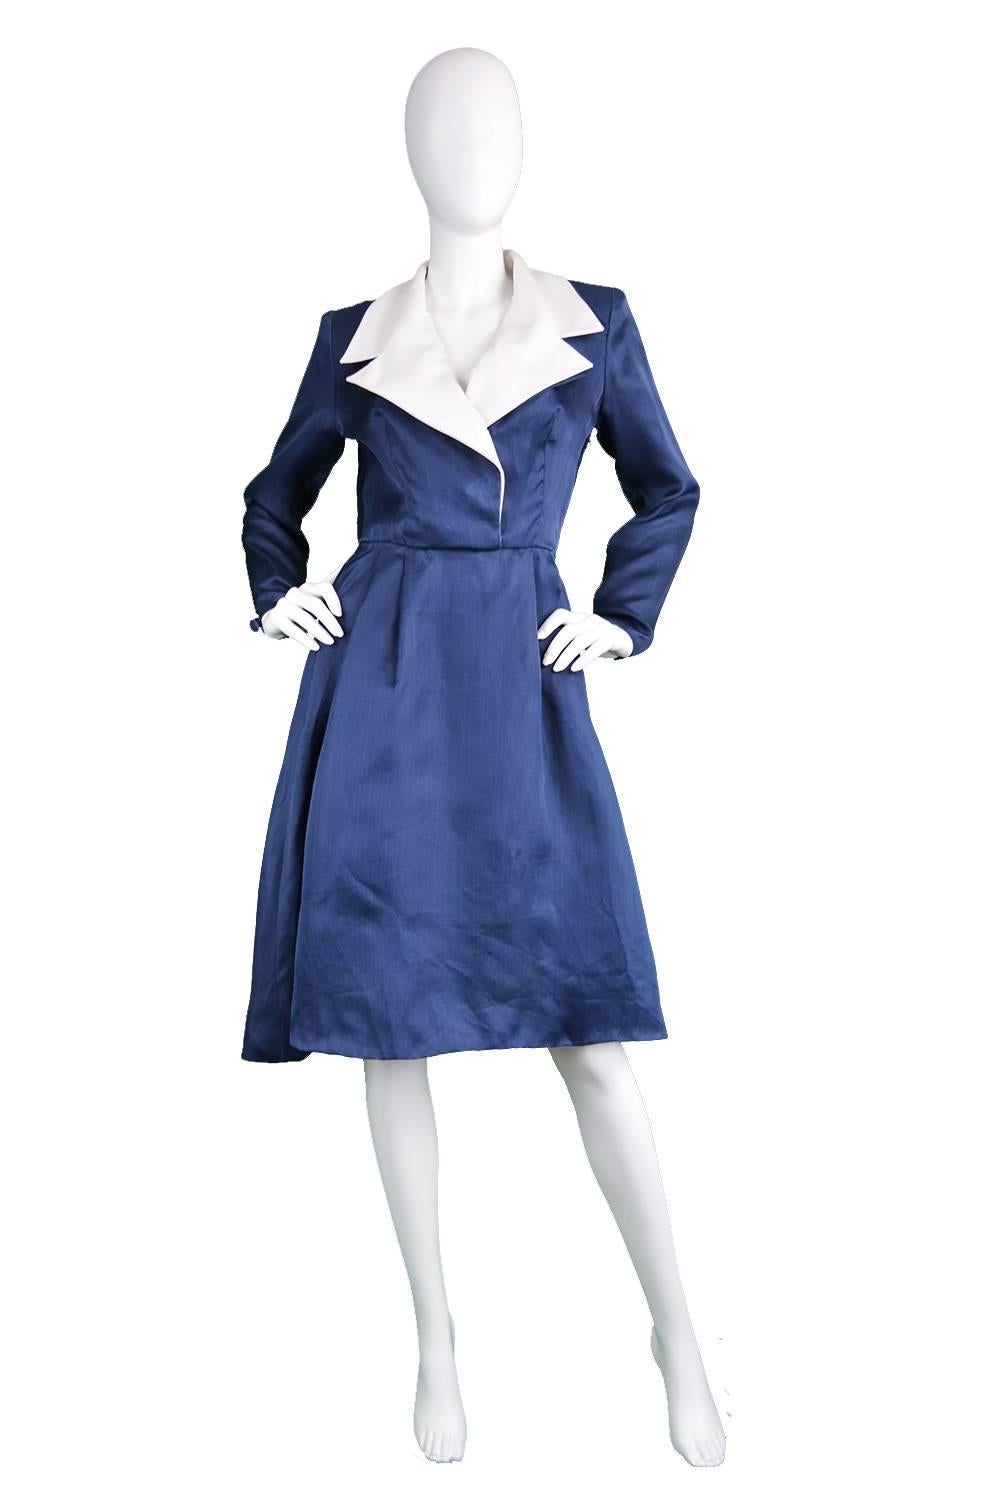 An incredibly chic and elegant vintage dress from the 1980s by legendary French fashion house Givenchy for their luxurious 'couture' line. In an unusual, blue organza fabric with a white linen collar. Made in France, this luxurious dress is light